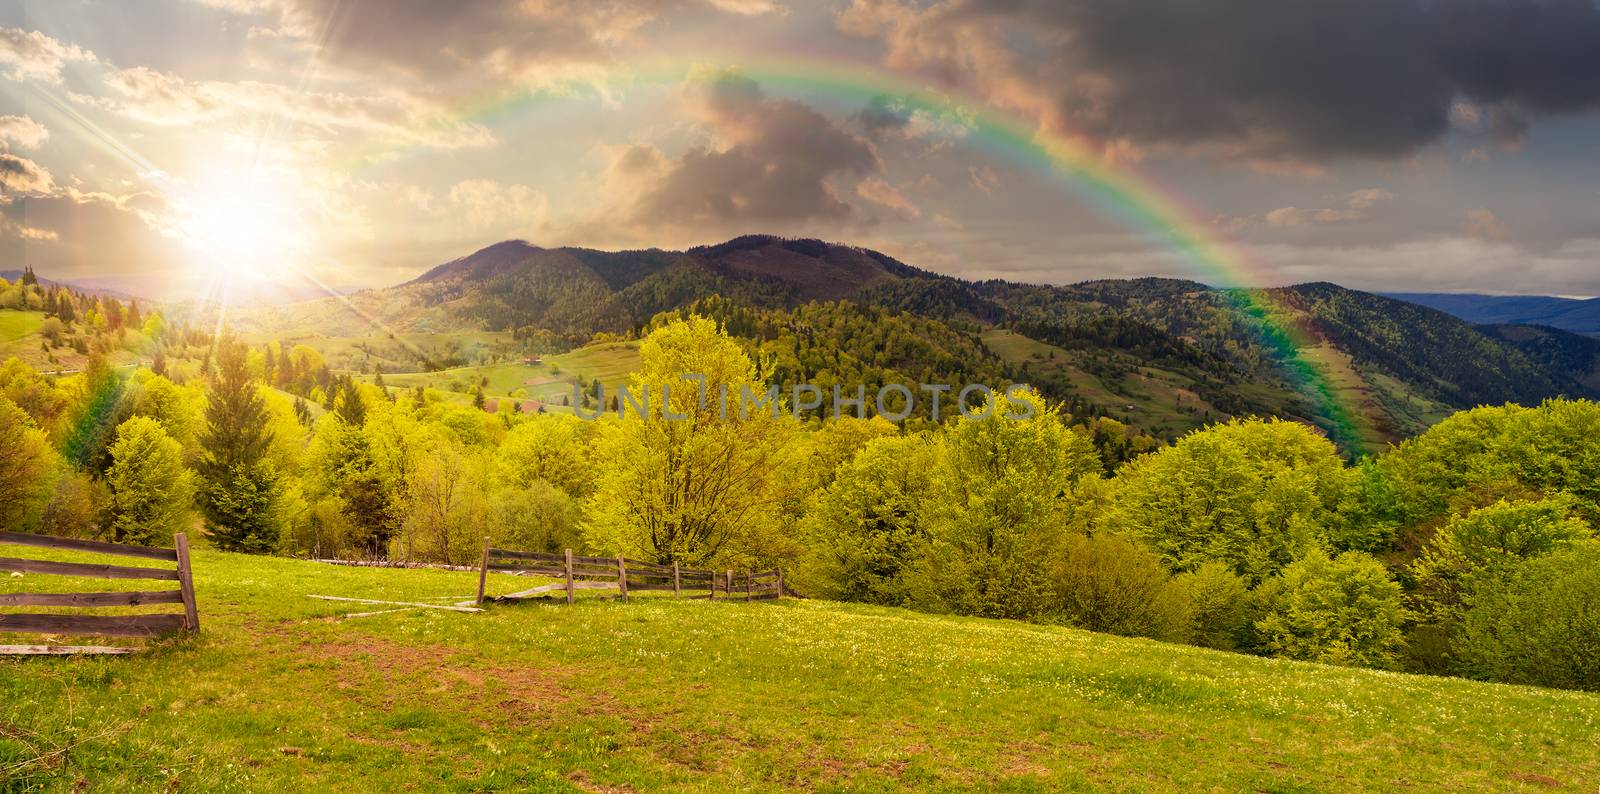 summer panorama landscape. fence near the meadow path on the hillside. forest in fog on the mountain in sunset light with rainbow